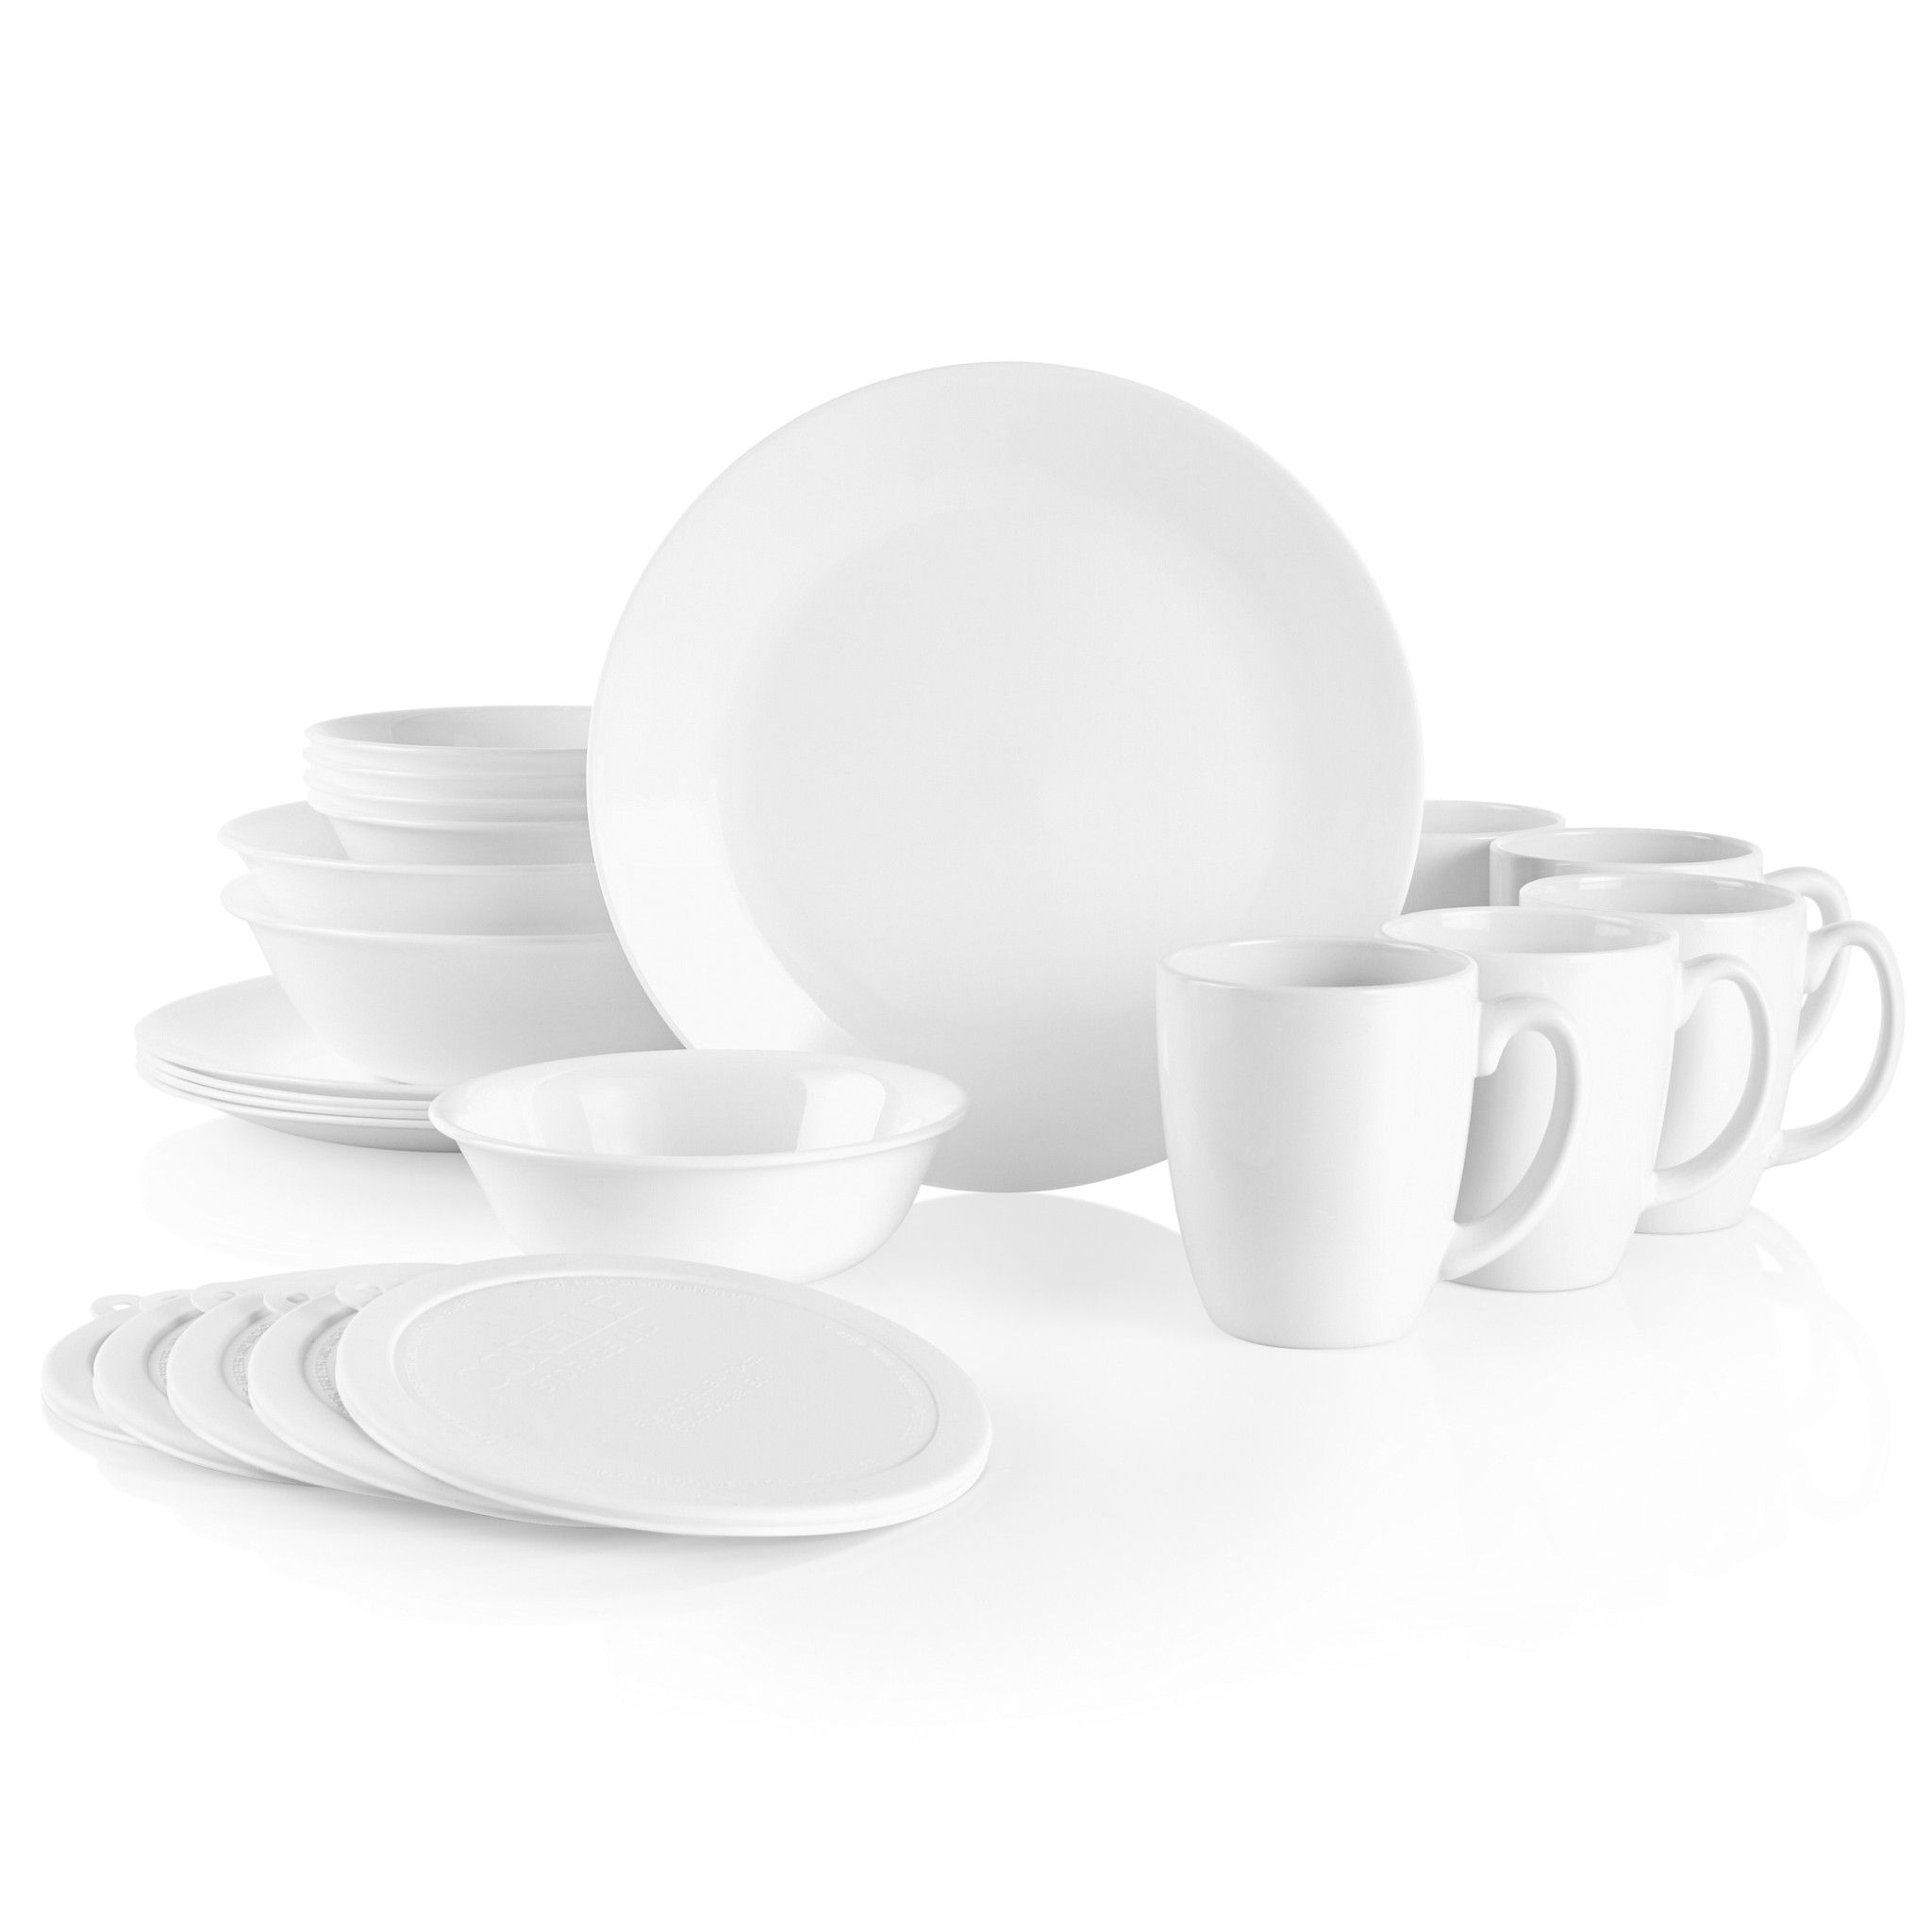 Corelle Winter Frost White 22-pc Dinnerware Set, Service for 5 - image 1 of 5